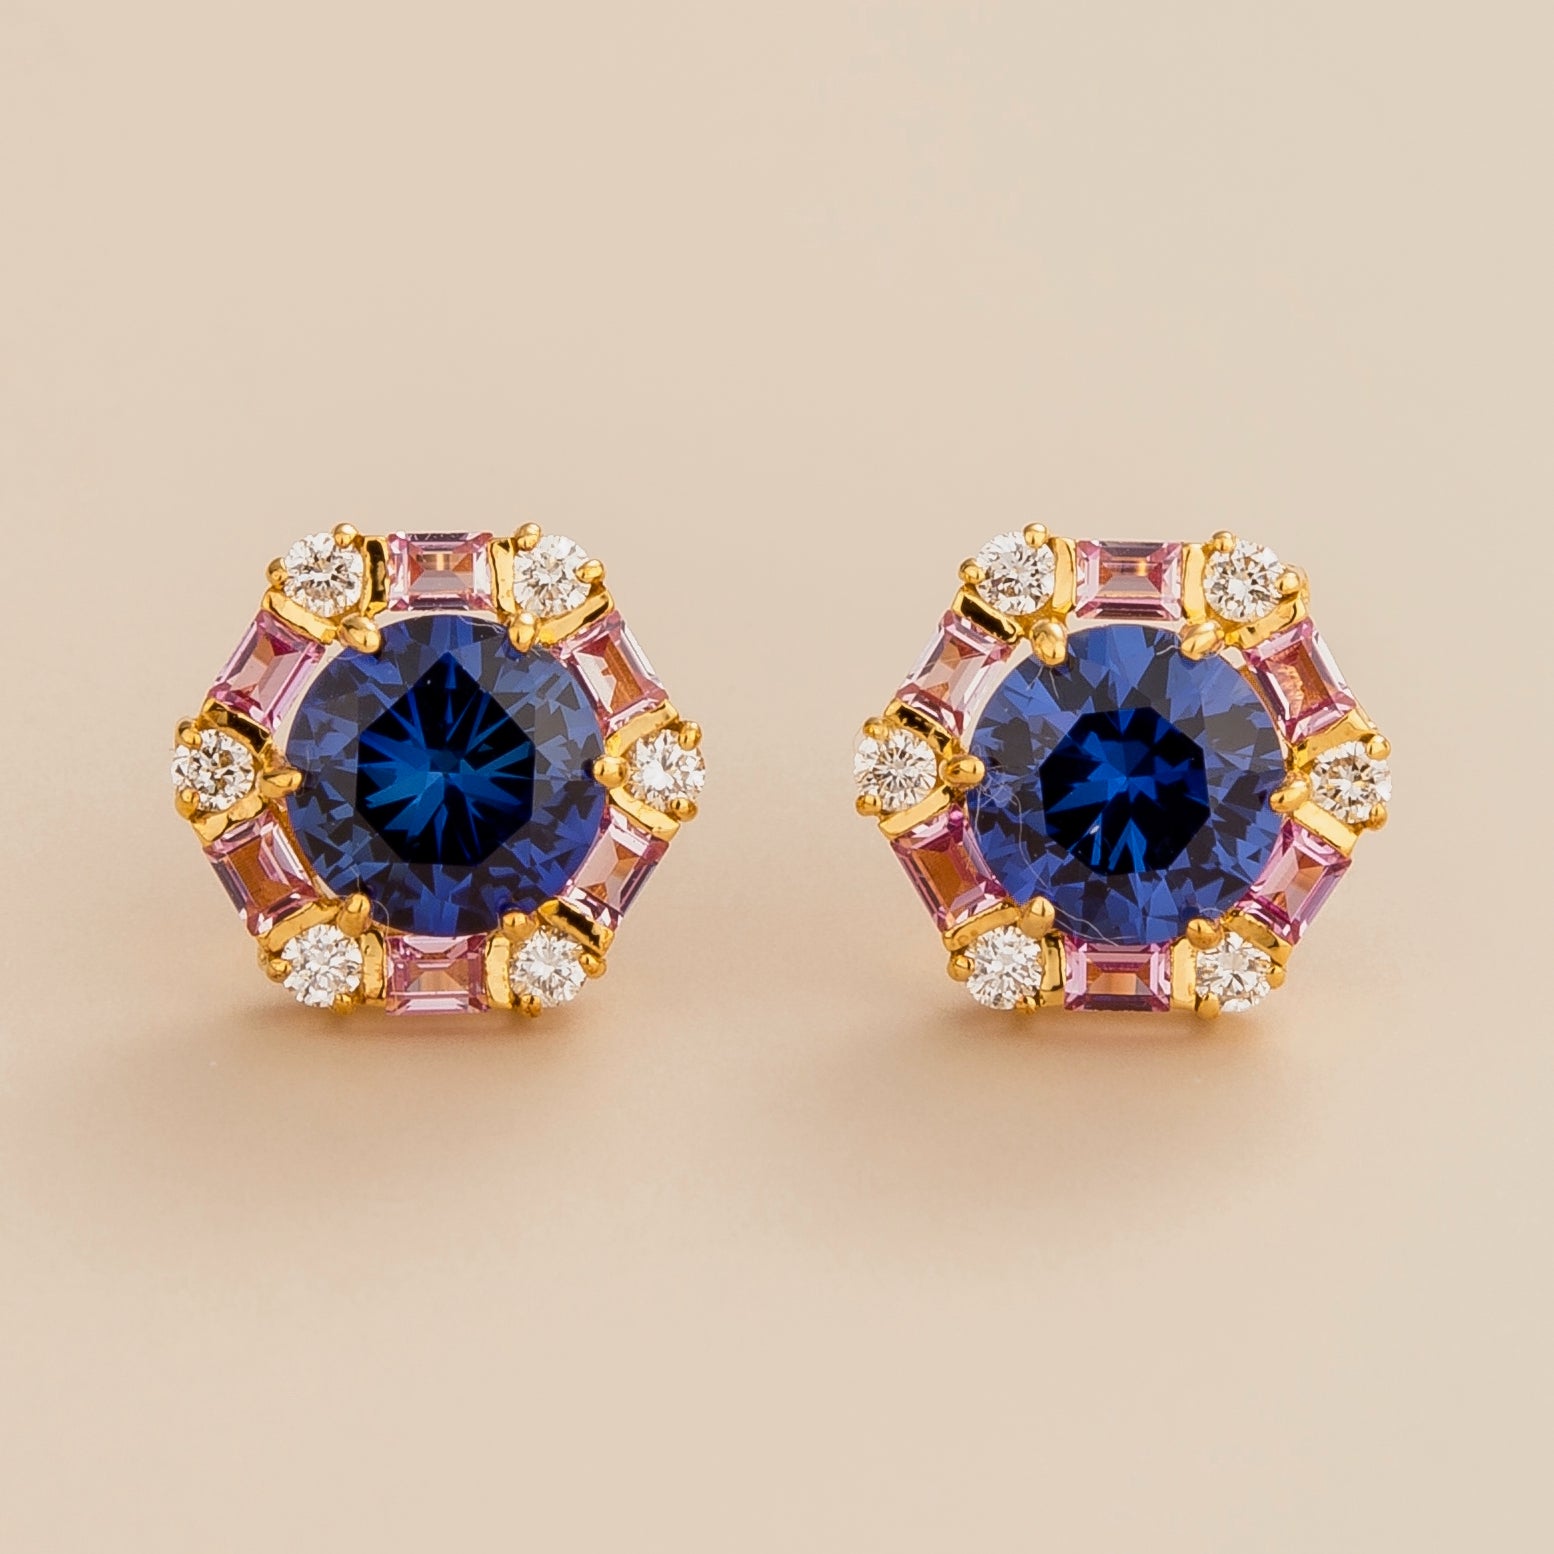 Melba hexagon earrings in 18K gold vermeil set with lab grown Blue sapphire, Pink sapphire and Diamond gem stones. Perfect for yourself and as gift.